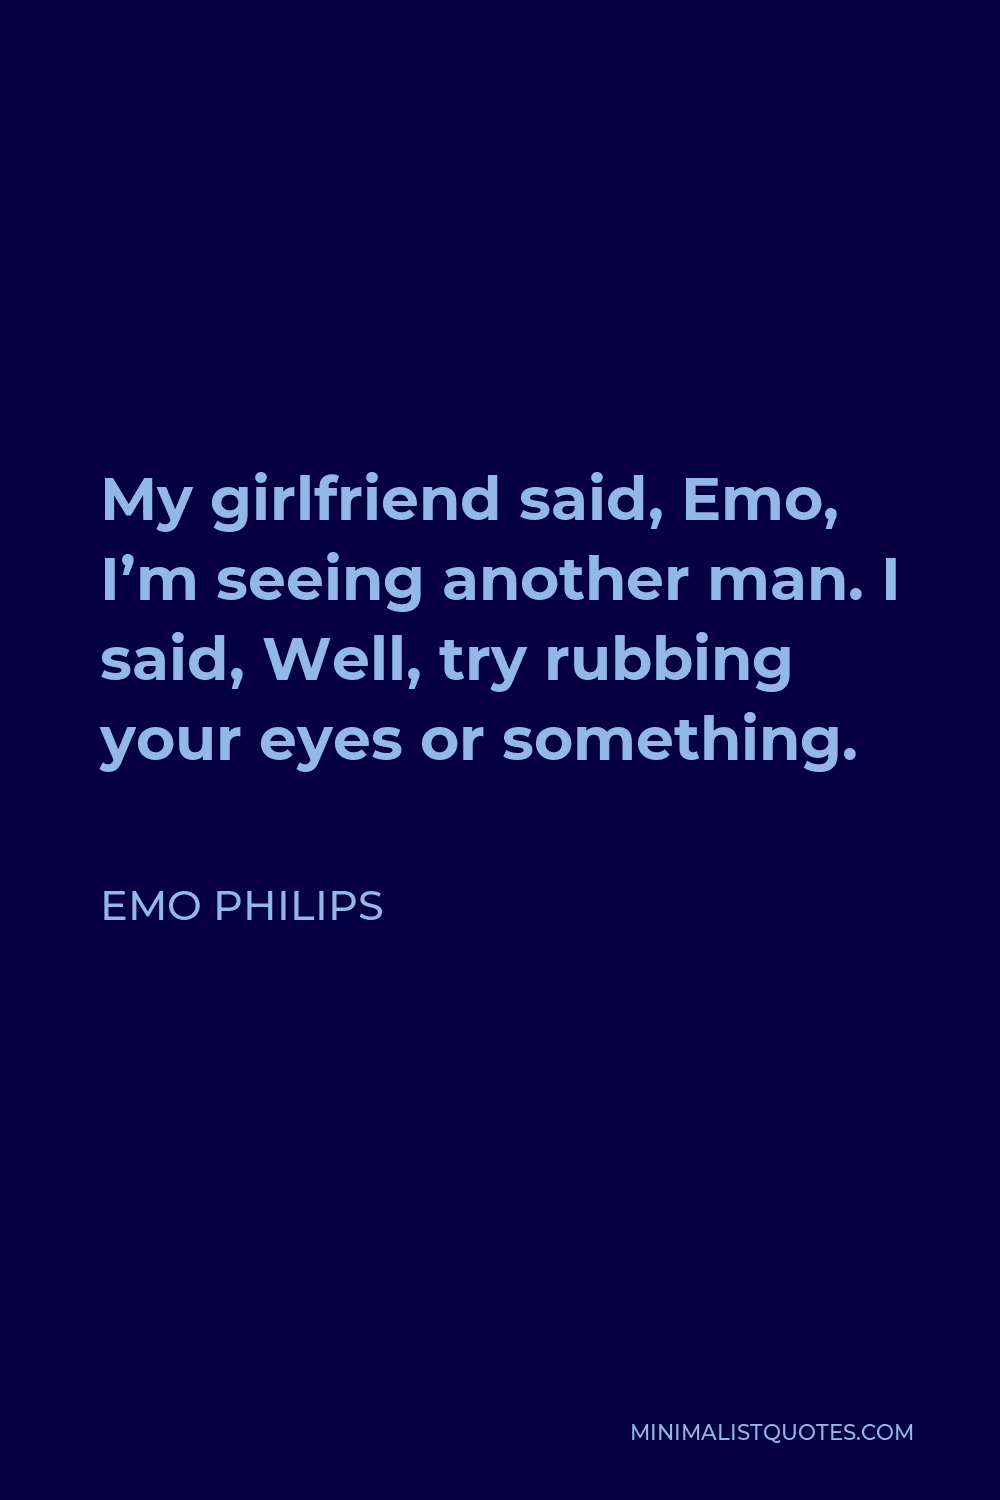 Emo Philips Quote - My girlfriend said, Emo, I’m seeing another man. I said, Well, try rubbing your eyes or something.